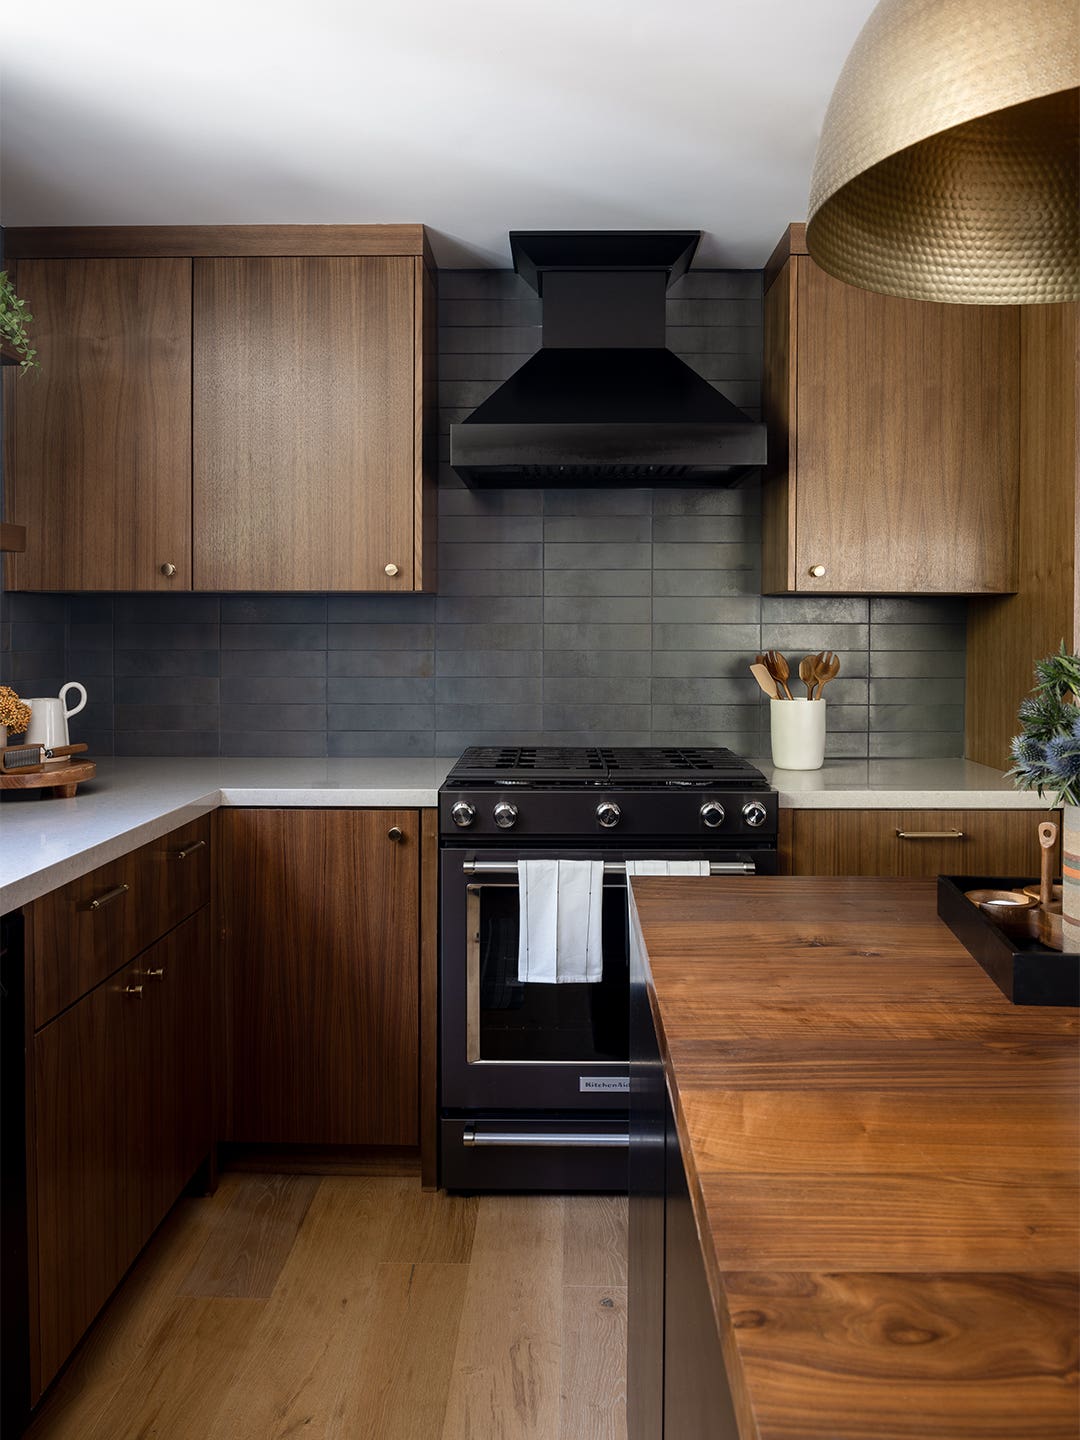 Kitchen with dark walls and wood cabinets